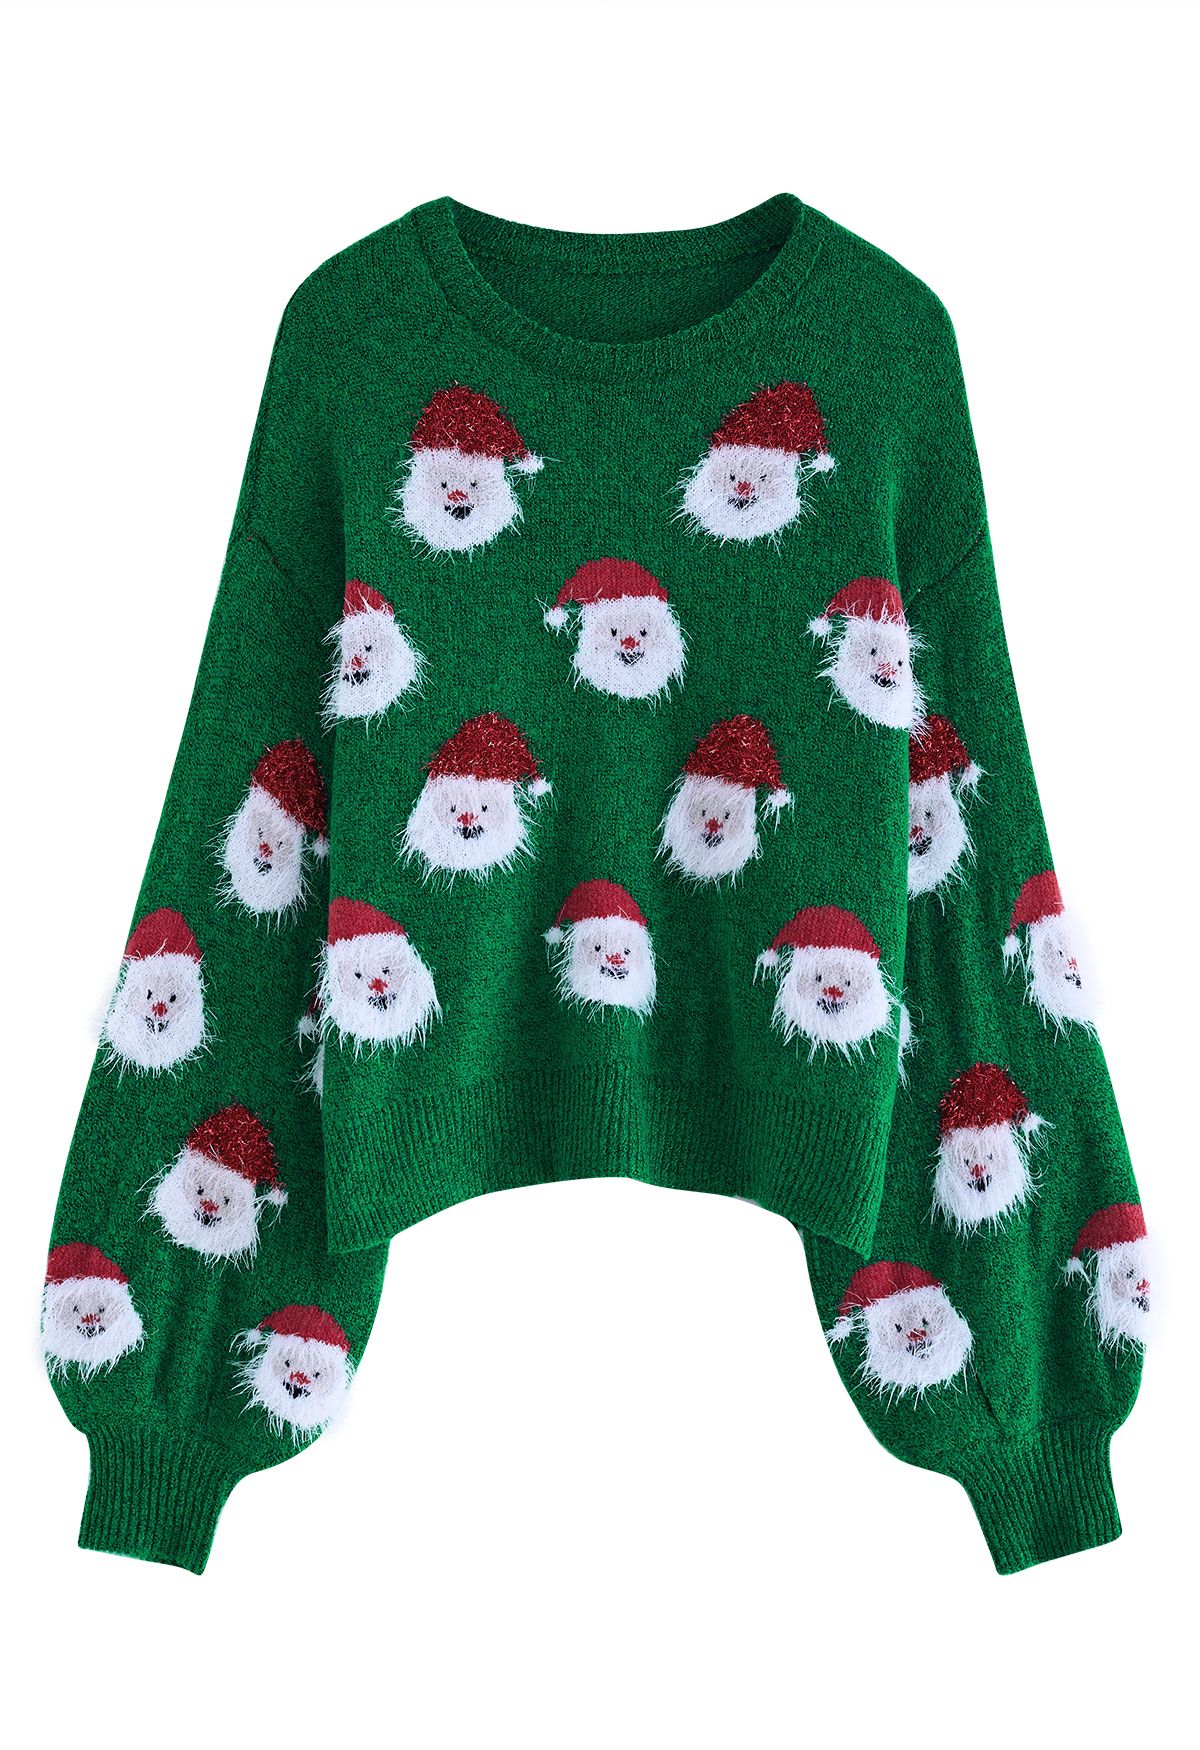 Fuzzy Santa Claus Knit Top in Green